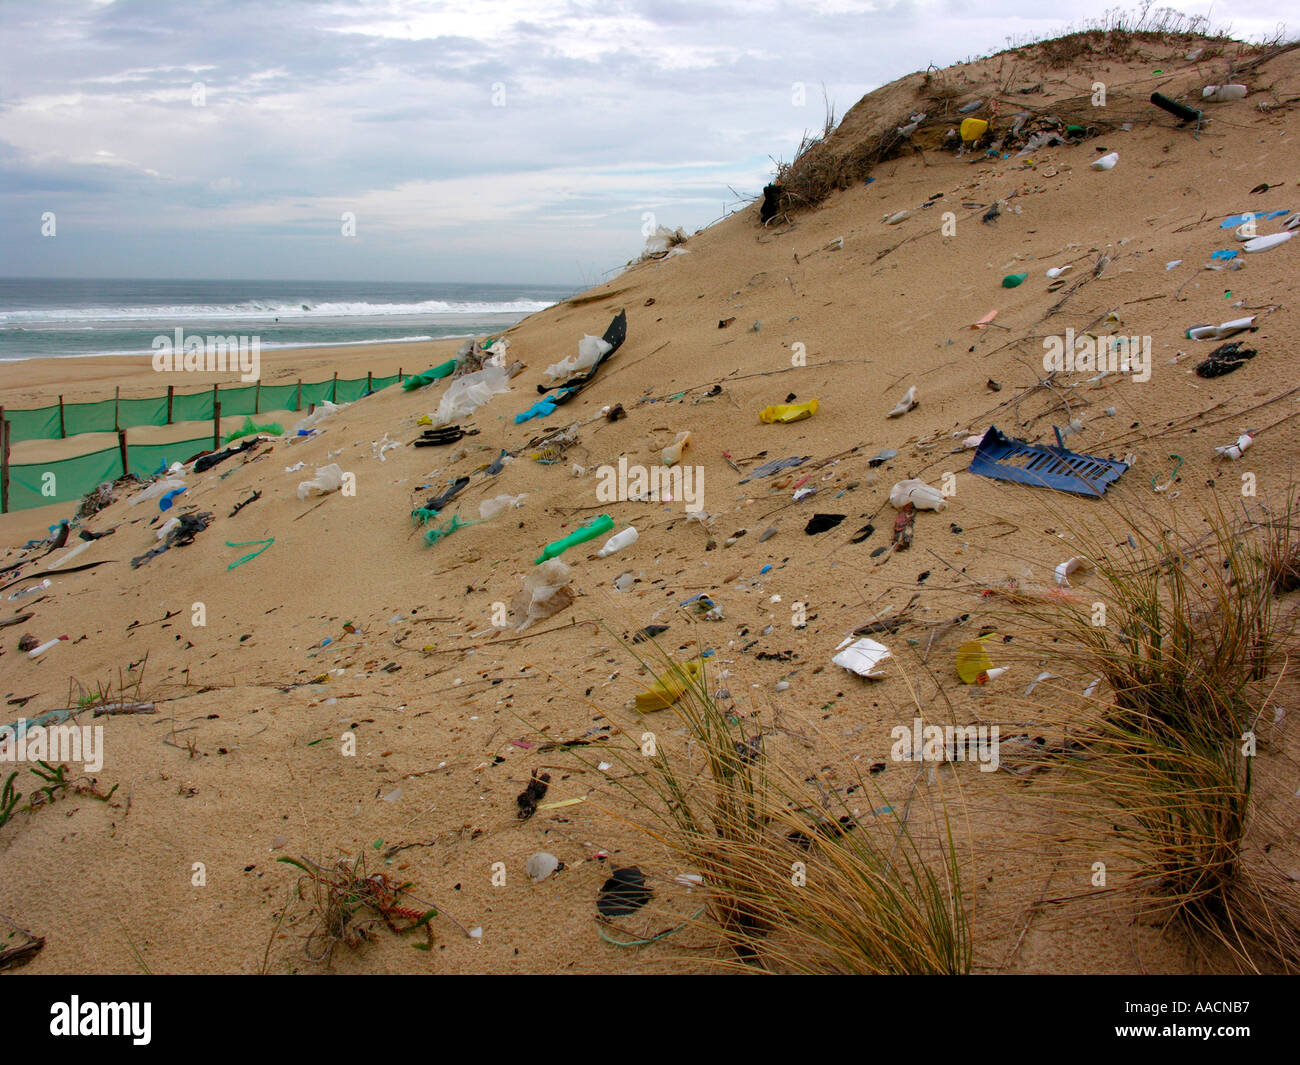 trash rubbish on dunes at the beach of Atlantic ocean in France Stock Photo